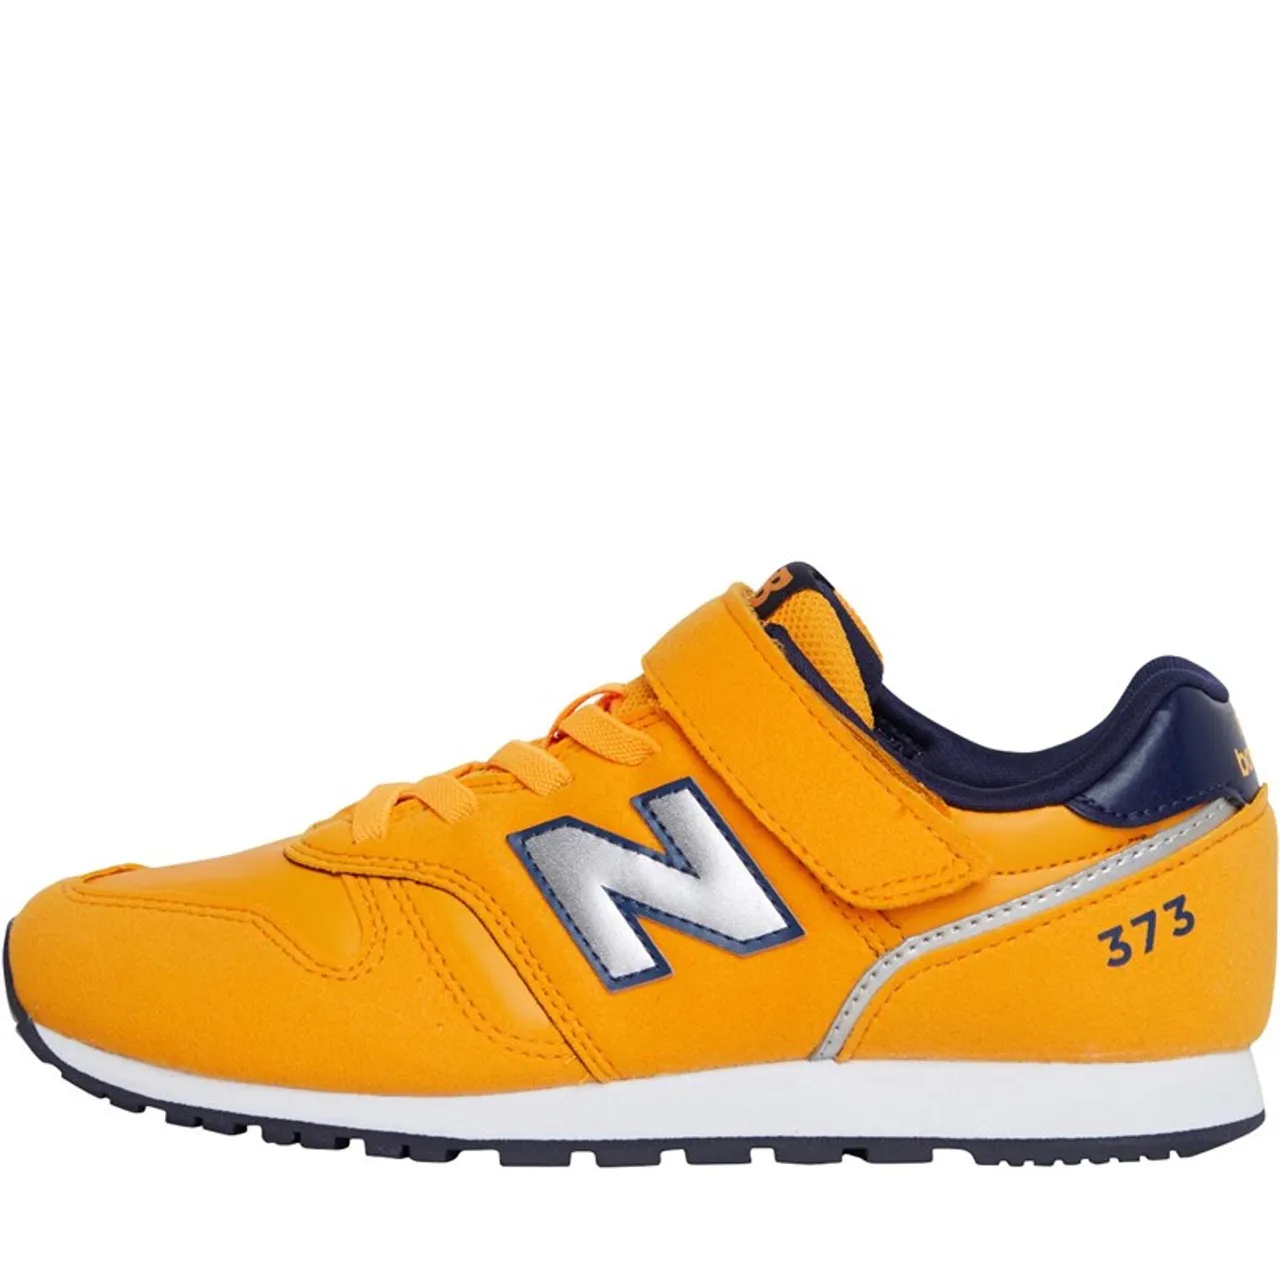 New Balance Junior Boys Wide Fit 373 Trainers Marigold